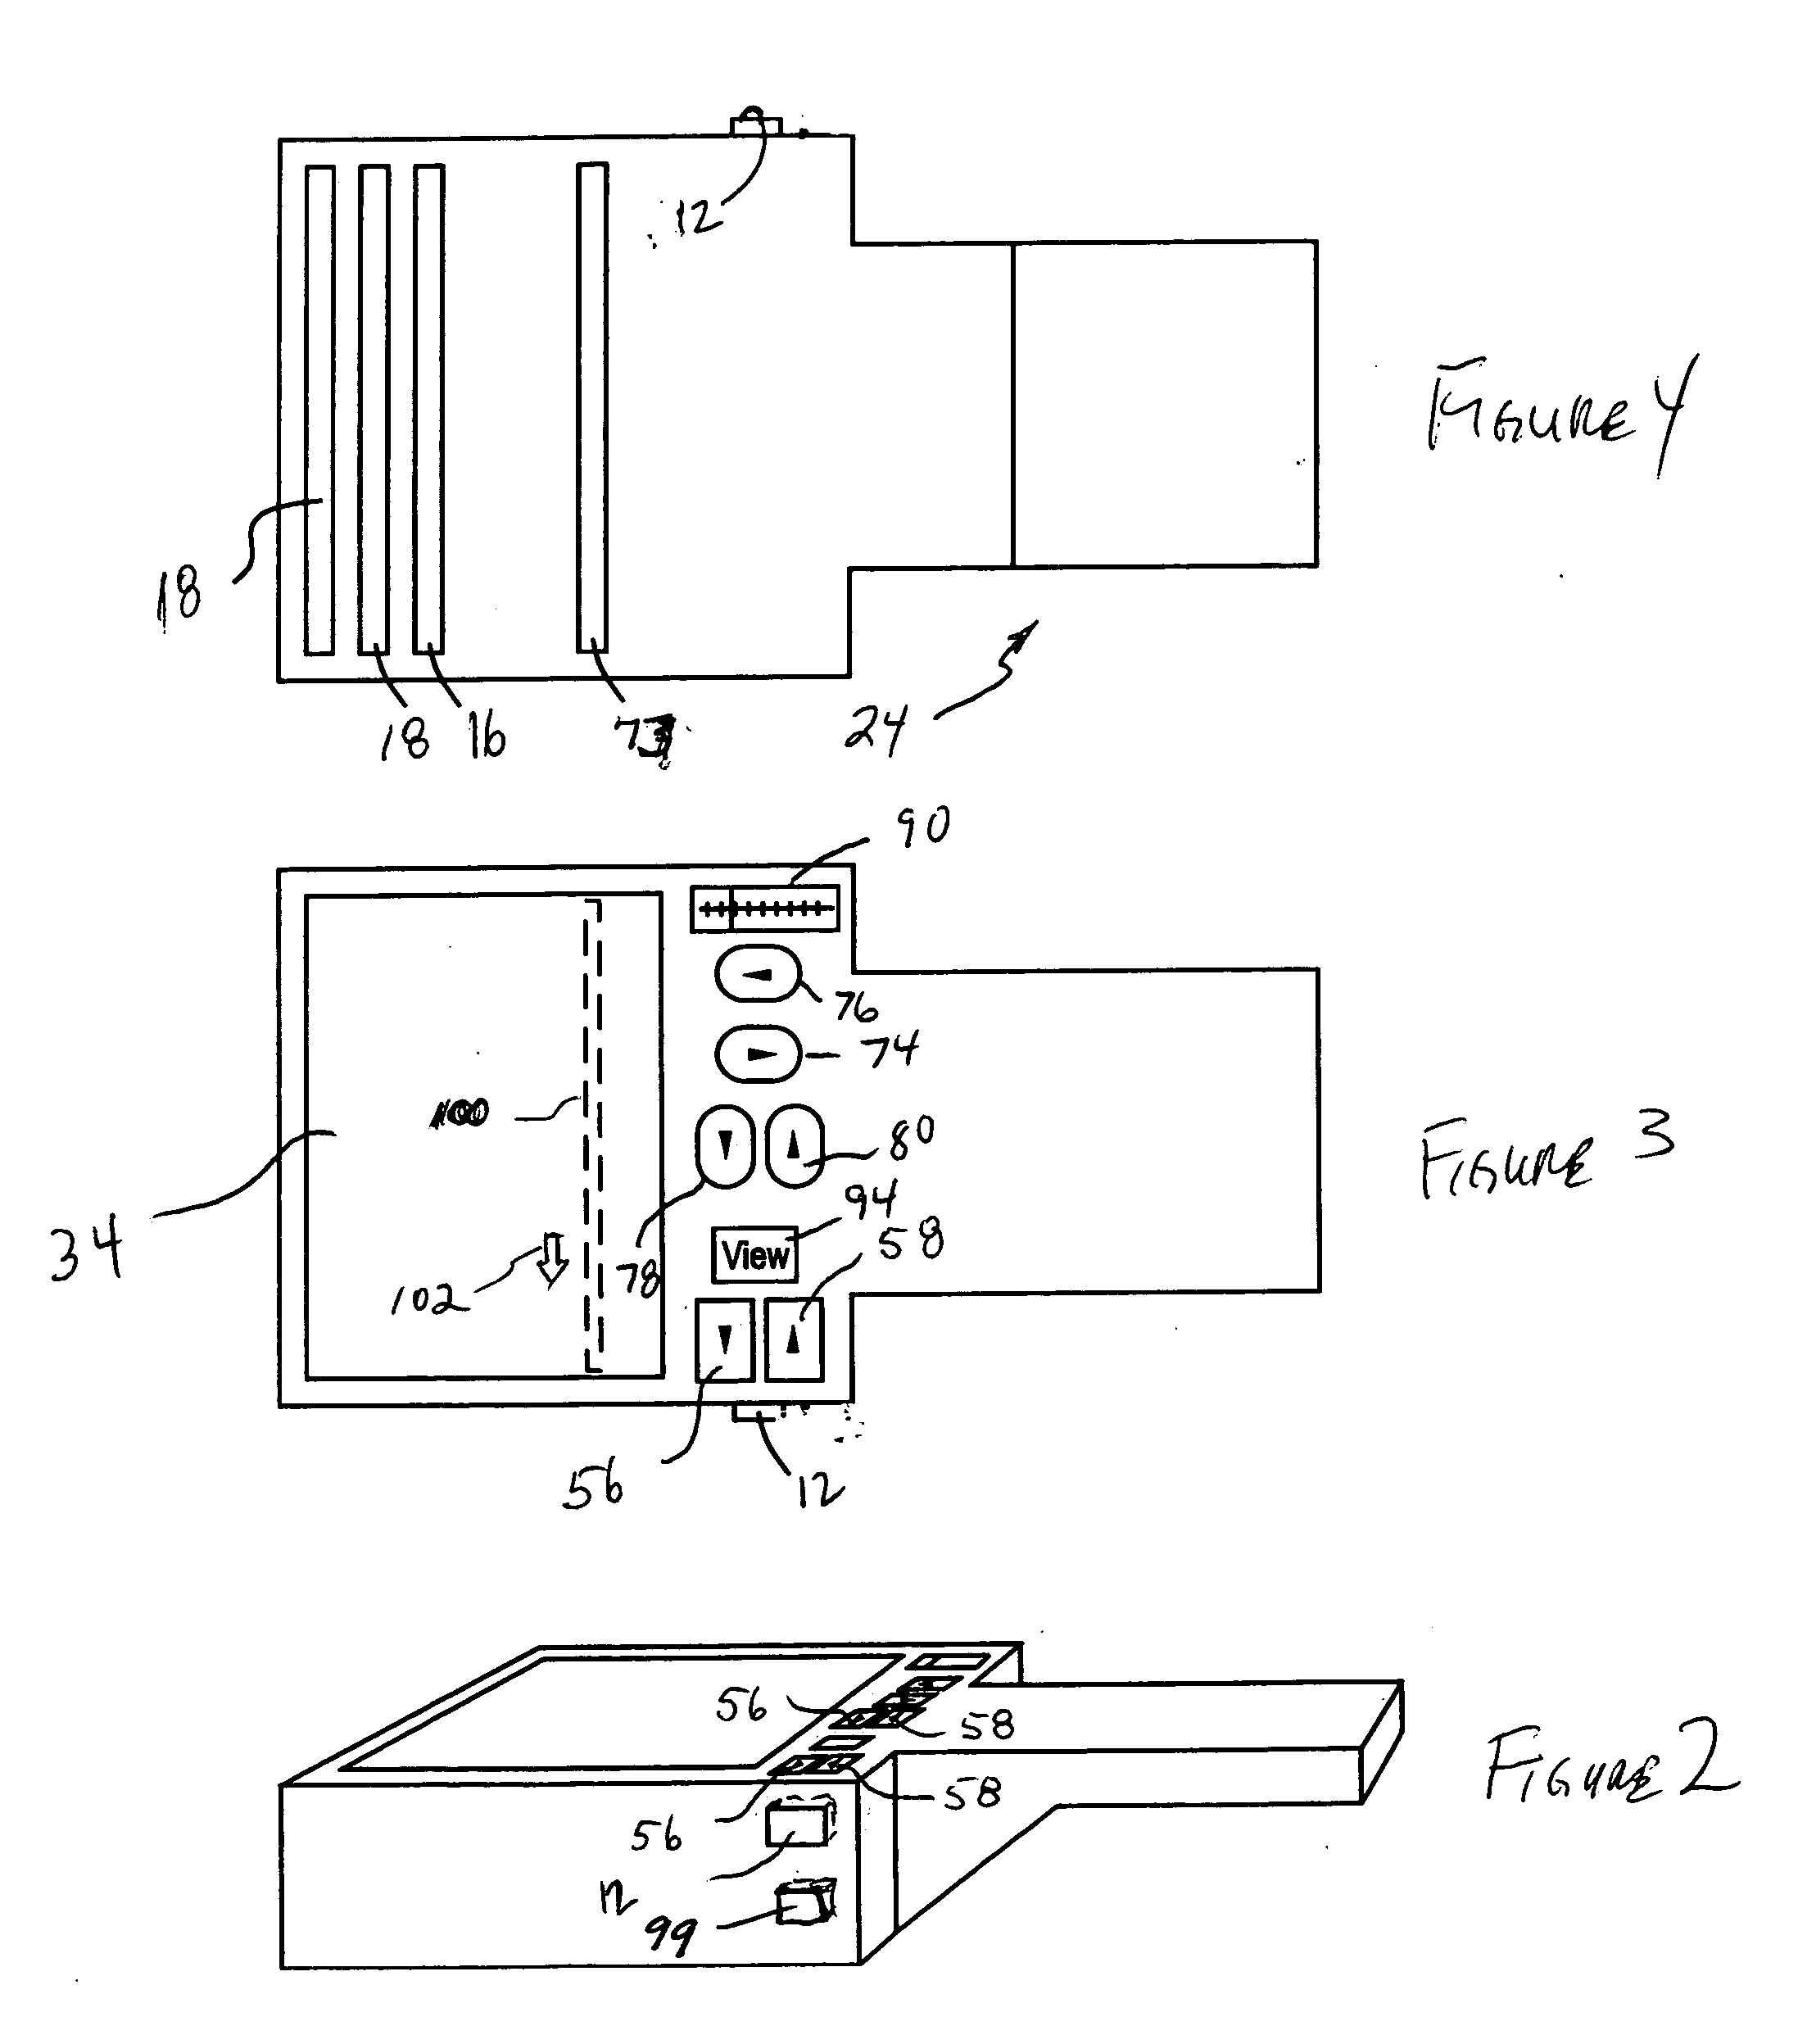 Ultrasound treatment and imaging system